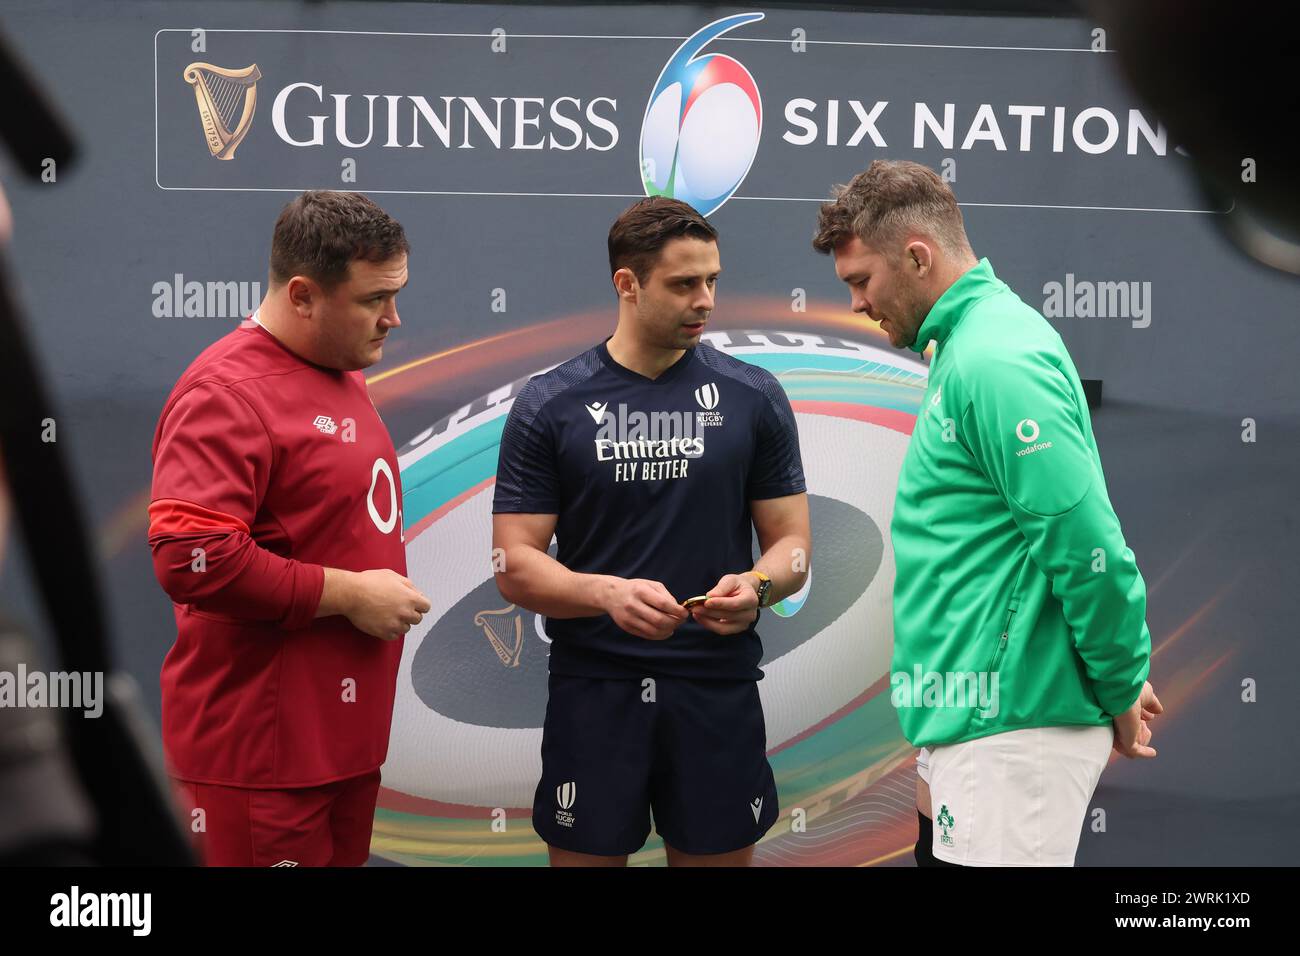 L-R England's Jamie George (Saracens) Referee Nika Amashukeli toss the coin and Peter O'Mahony of Ireland (Munster)  before kick off during Guinness 6 Stock Photo